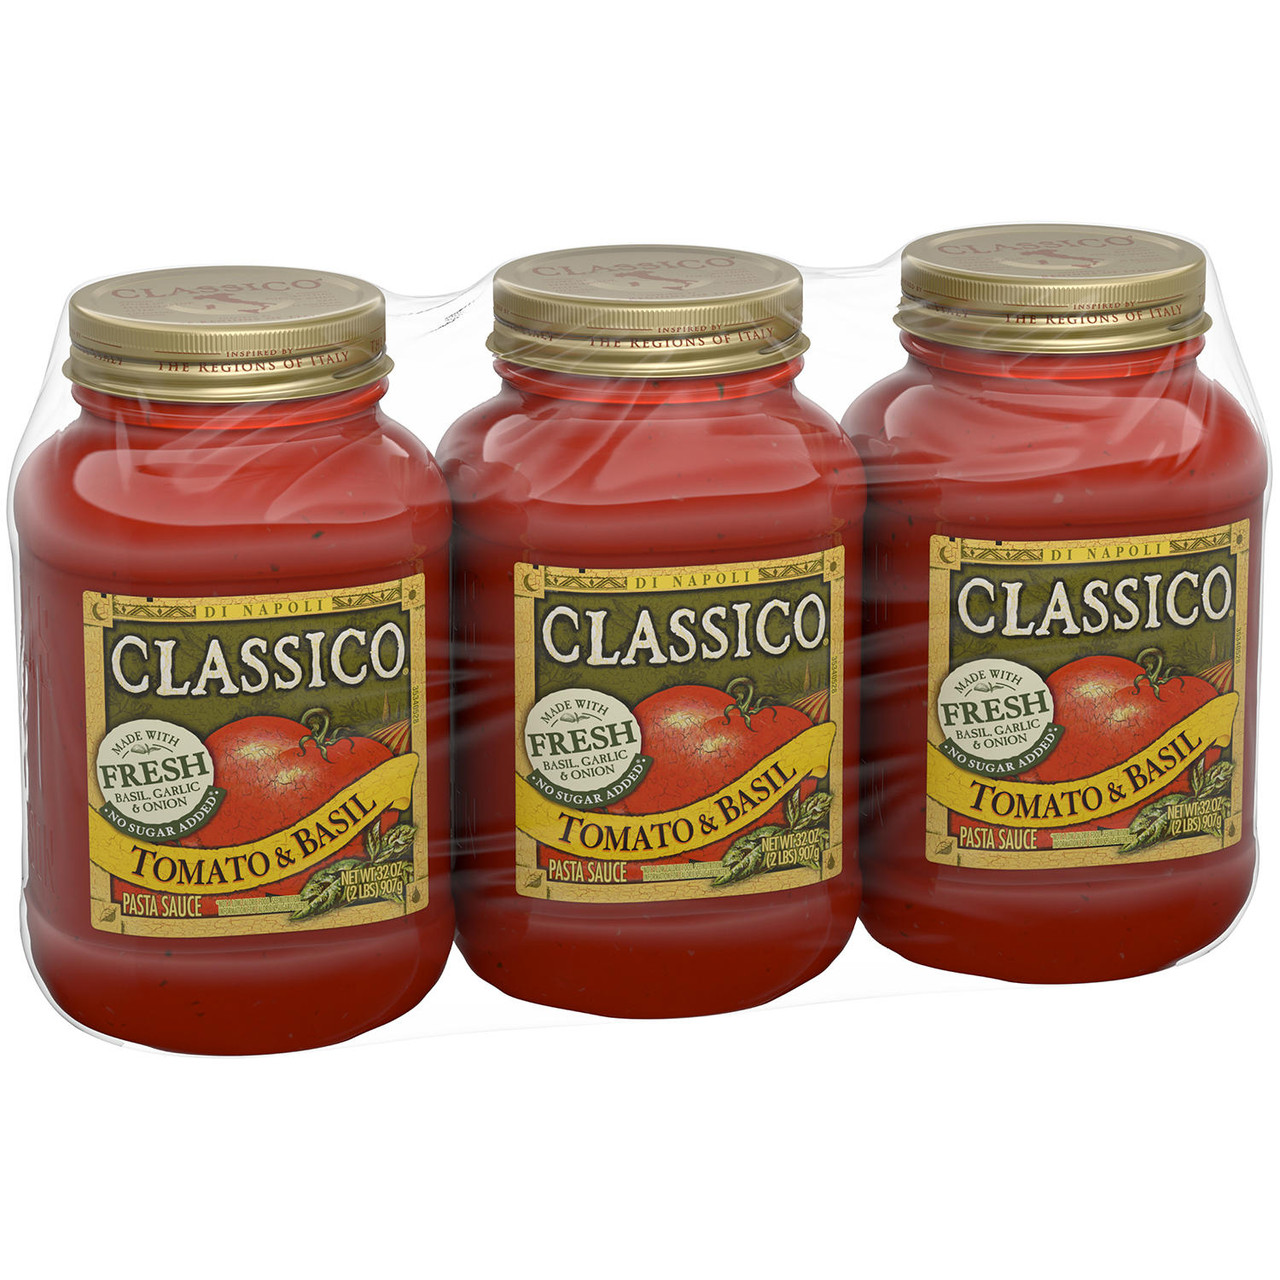 Classico Tomato and Basil Pasta Sauce (32 oz., 3 pk.) - [From 51.00 - Choose pk Qty ] - *Ships from Miami